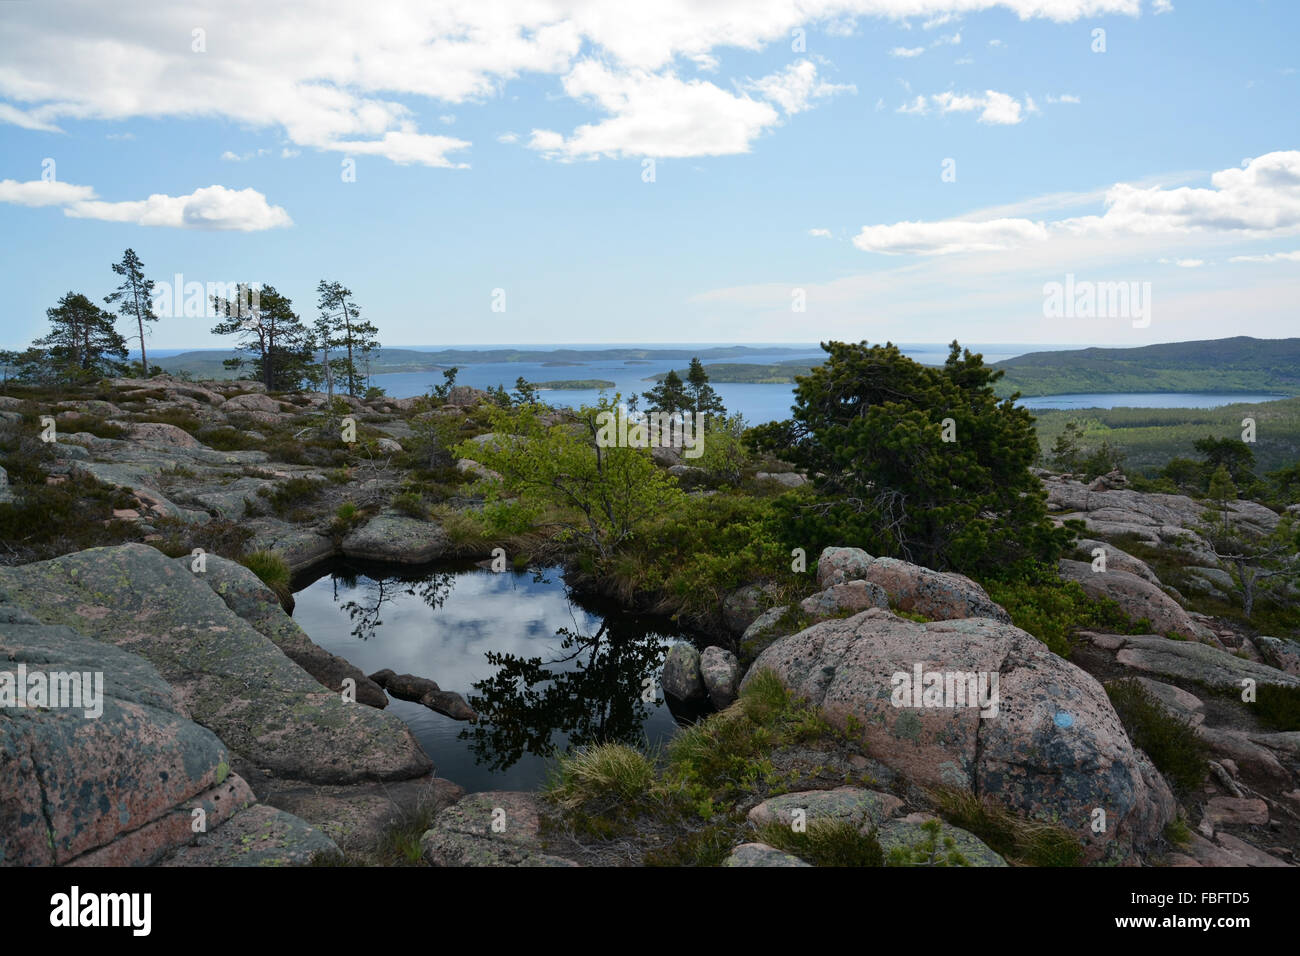 Skuleskogen National Park is a Swedish national park in Vaesternorrland County, on the coast of the Baltic Sea, in northern Swed Stock Photo